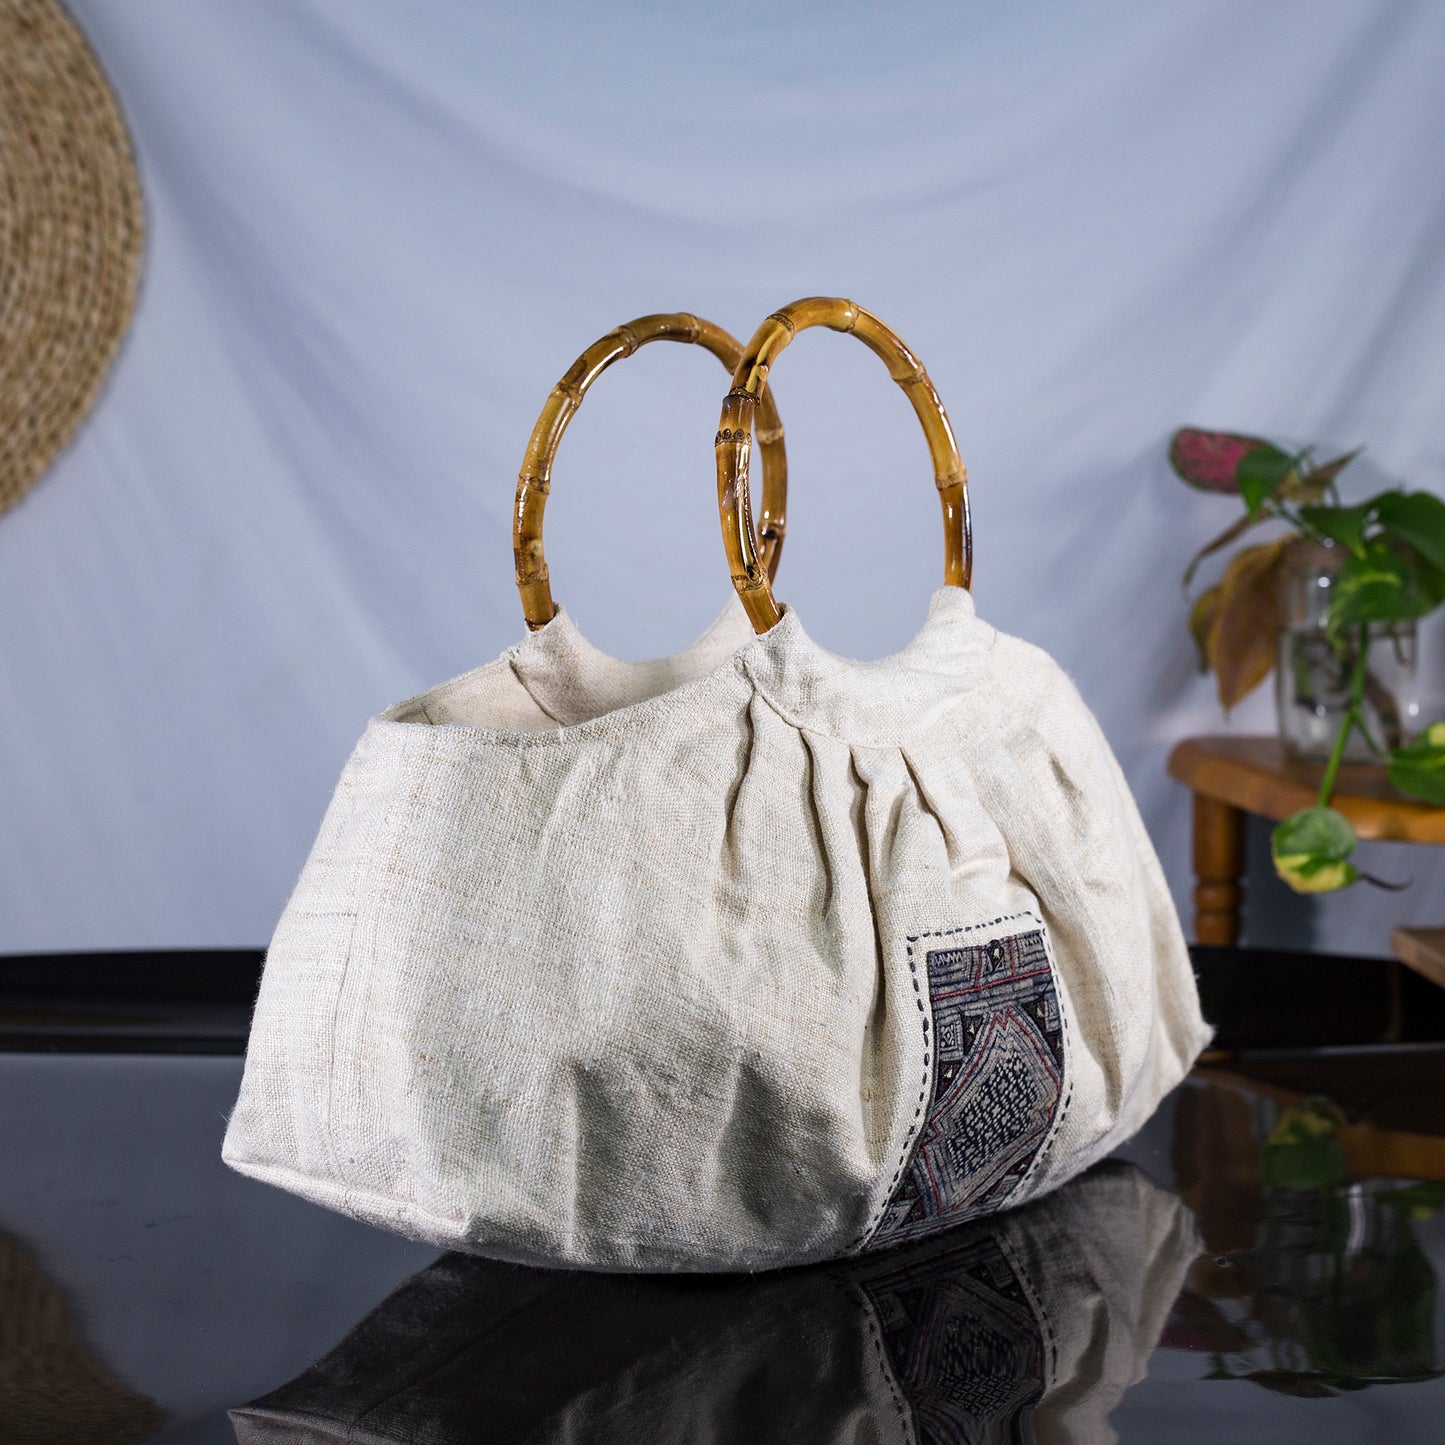 Bamboo handle bag, natural hemp in WHITE with vintage patch